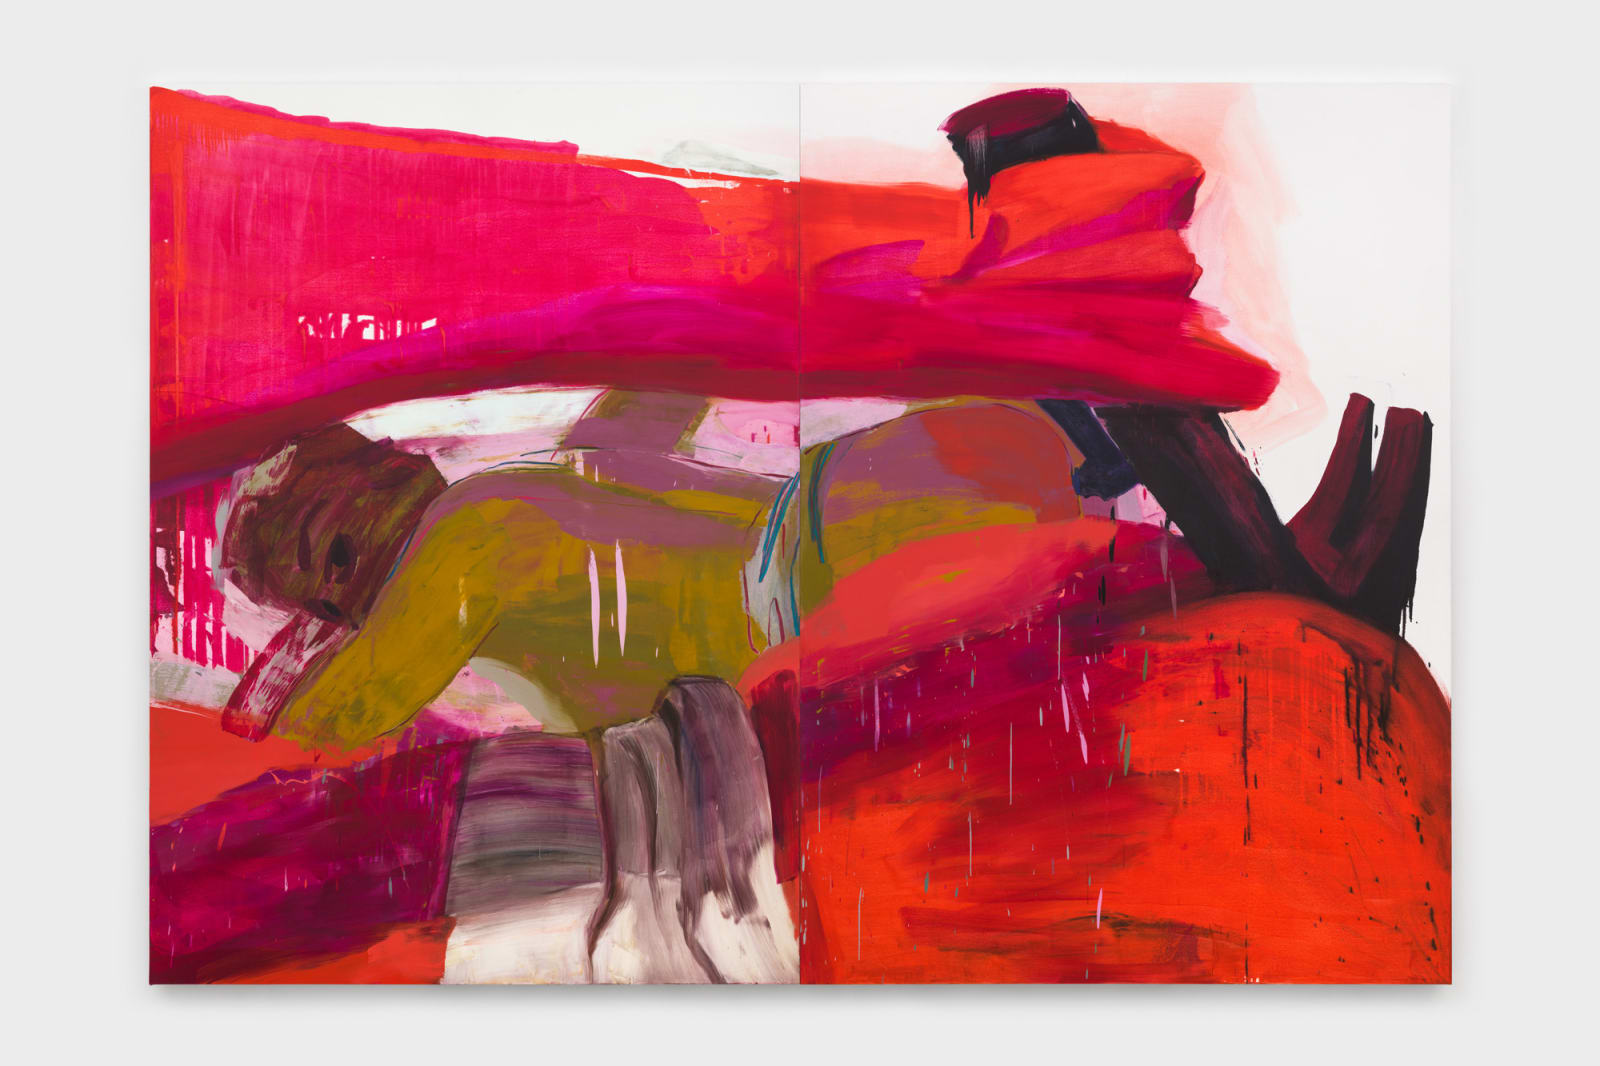 The largest piece in the show, this giant diptych burns with fiery reds and glowing magentas. In this wide, horizontal format body forms appear as a landscape against a stark white background - a hand and a hammer or a jagged mountain top and craggy rocks? The large shapes in the foreground are super fresh and transparent, a huge arm stretching across the top from left to right, holding the butt of a hammer that's being ecstatically driven into butt cheeks. Drips abound in this energetic piece, heaving with motion. Looking within the space between large arm and small of back, a face presents itself from within a shadow, smeared with reds and greens and glancing right at you. The face belongs to a curving body, mimicking her giant double, right arm raised behind her back, hammer head jammed between cheeks.